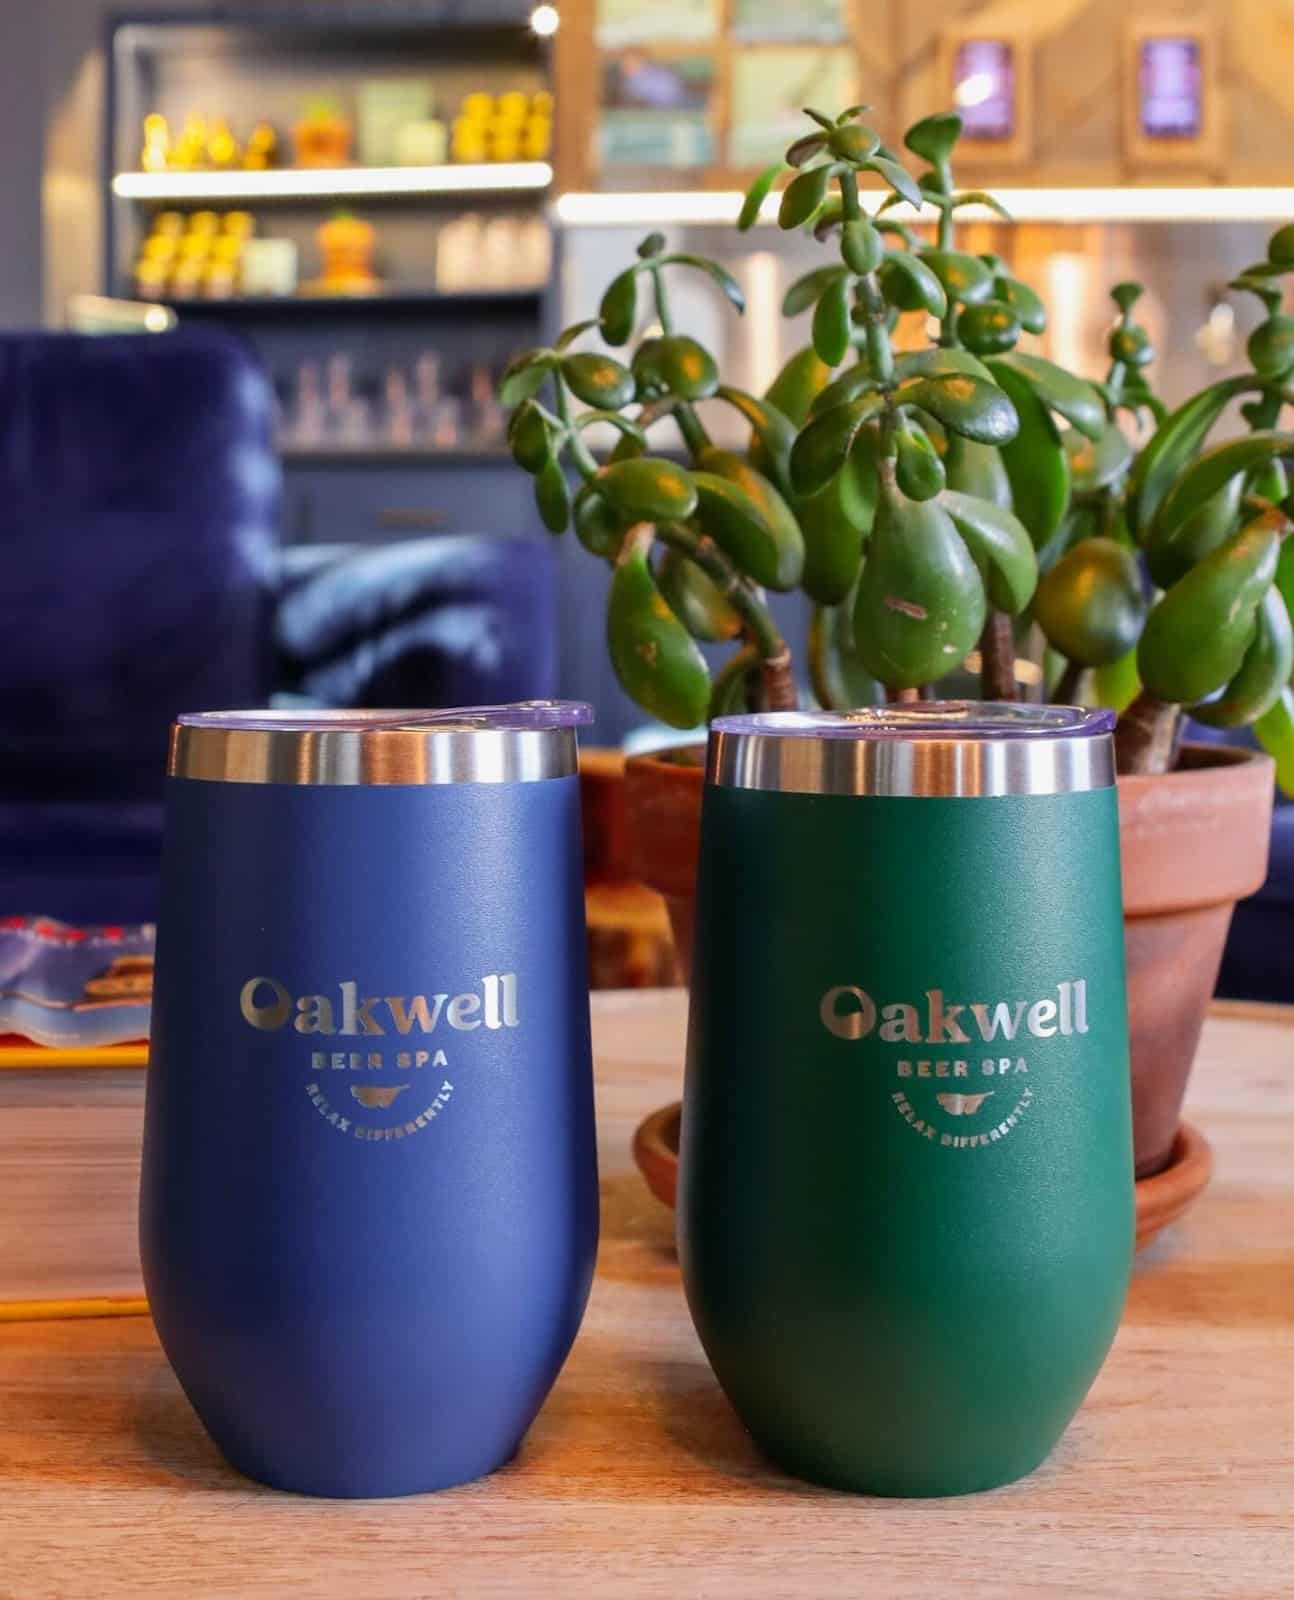 Oakwell Beer Spa tumblers with beer